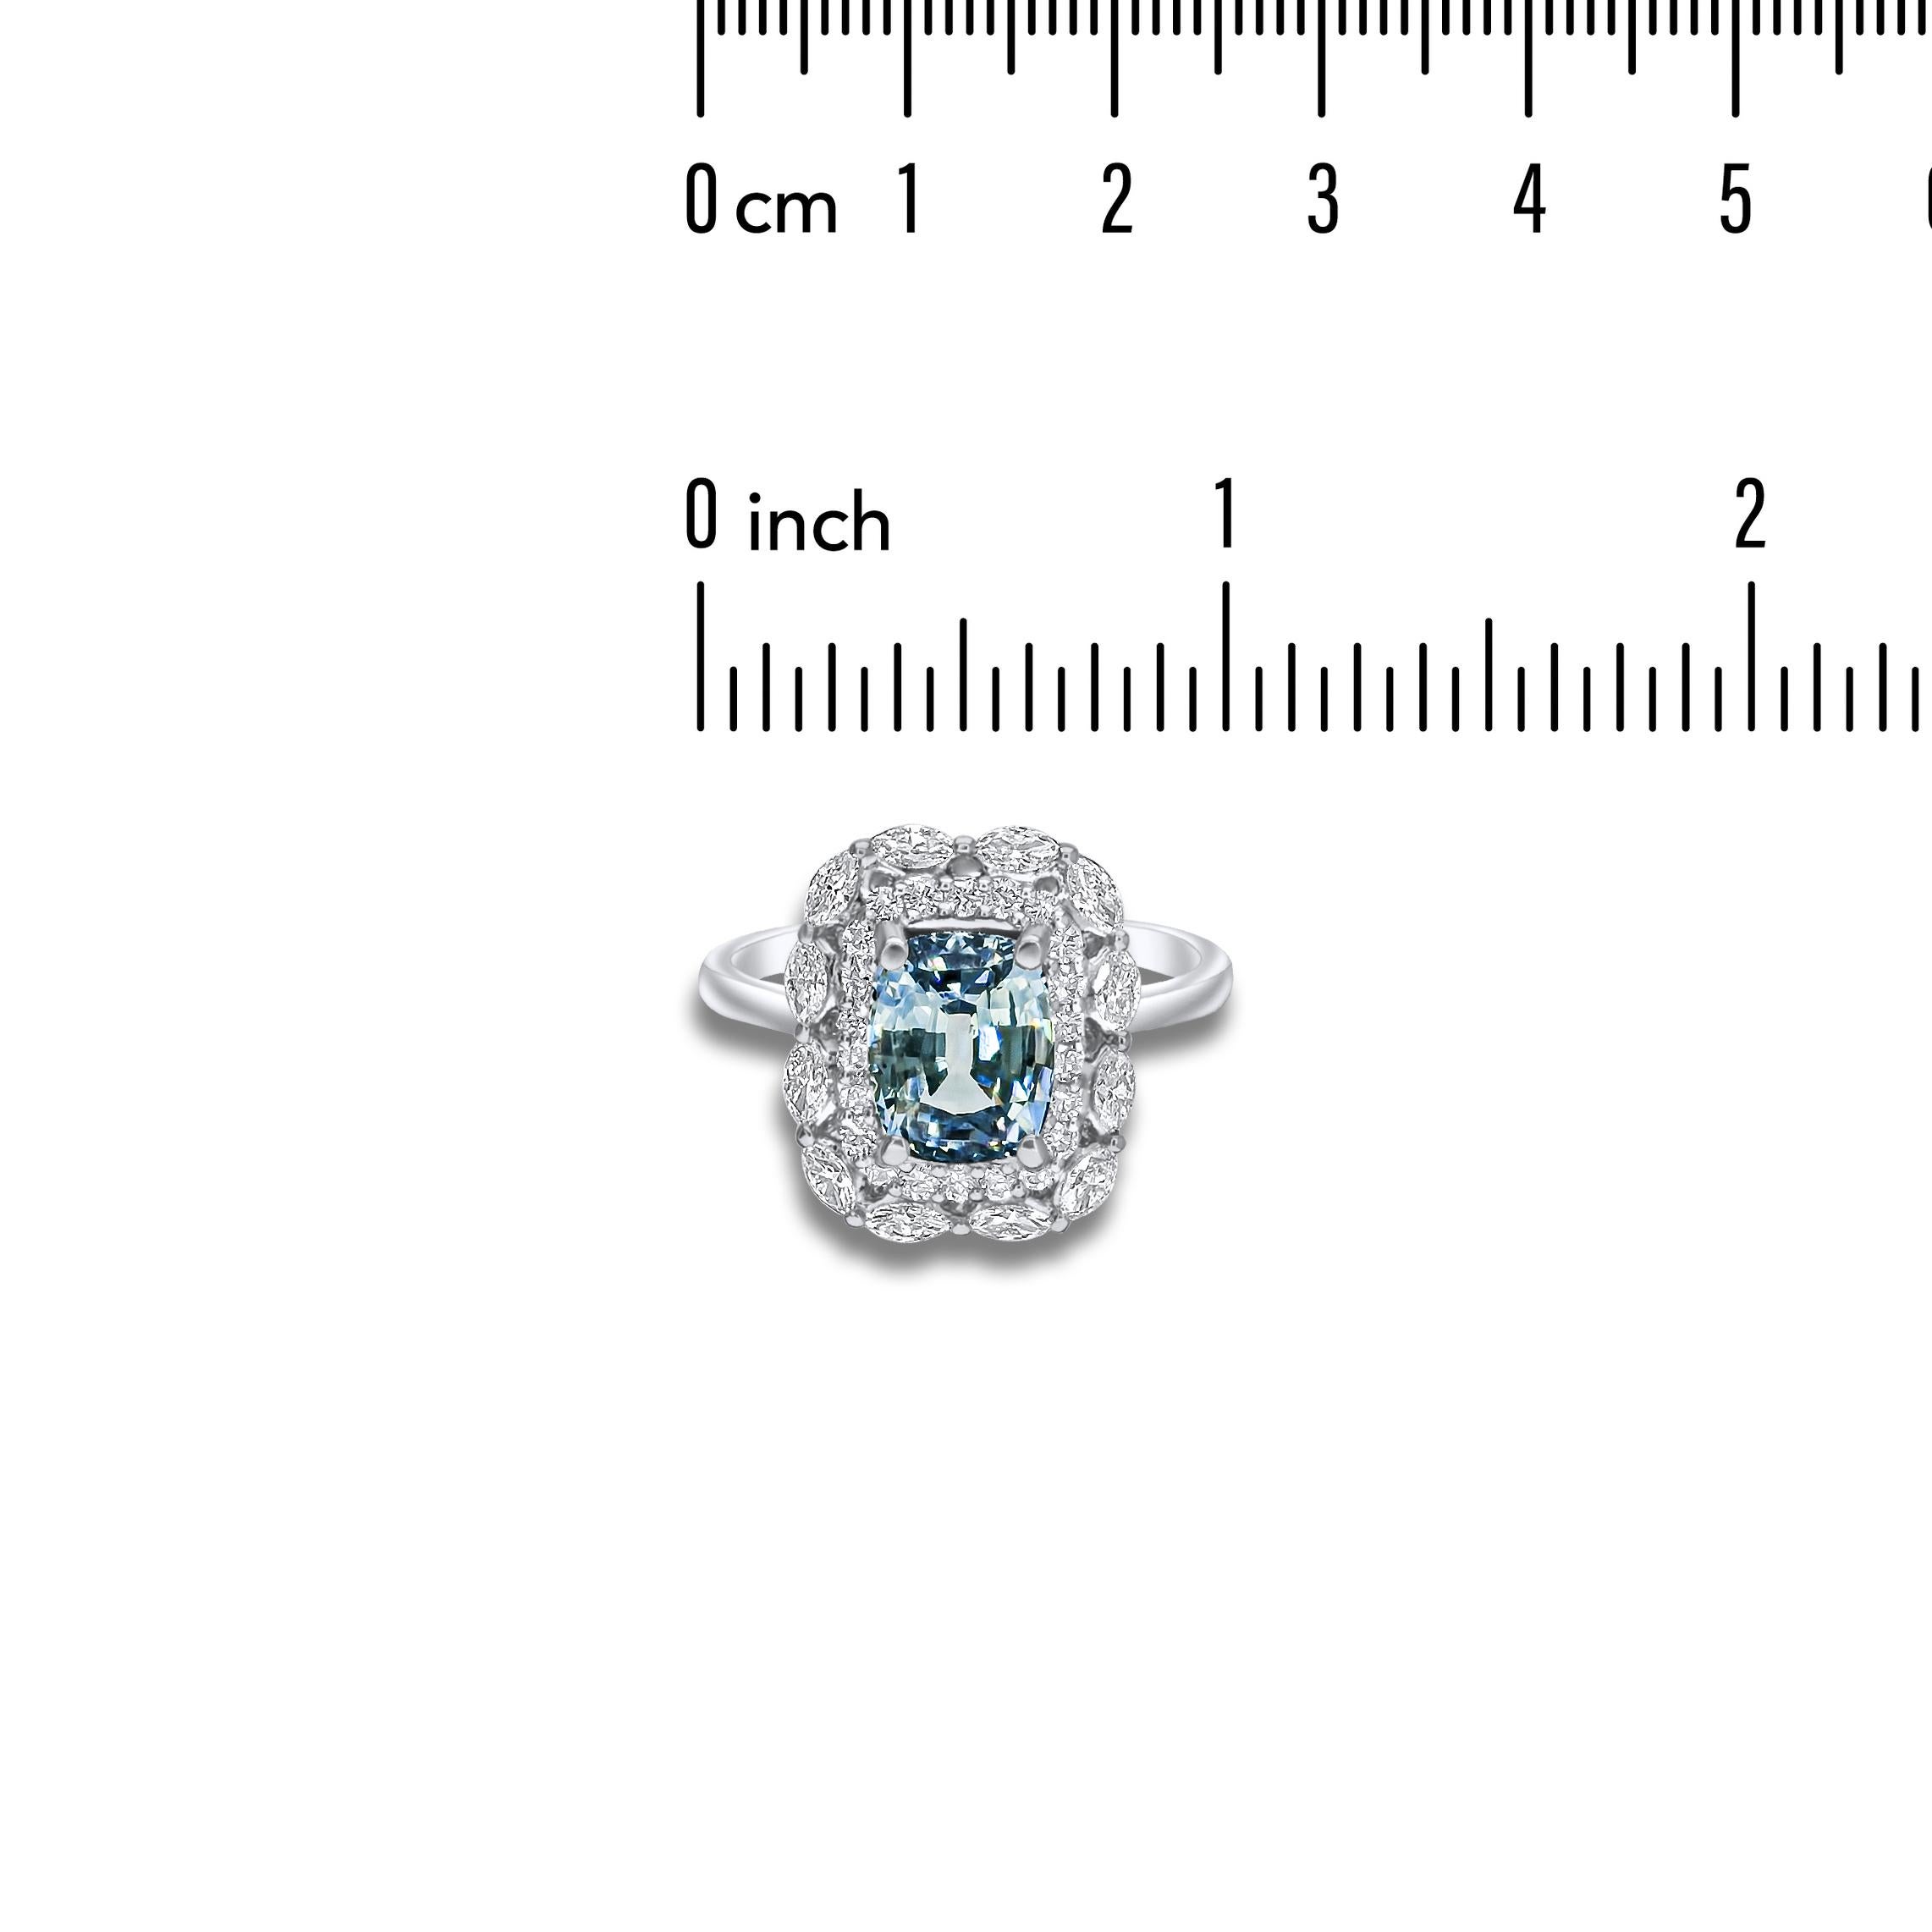 GIA Certified 2.69 Carat Cushion Cut Grey-Blue Sapphire and Diamond Ring ref1300 In New Condition For Sale In New York, NY